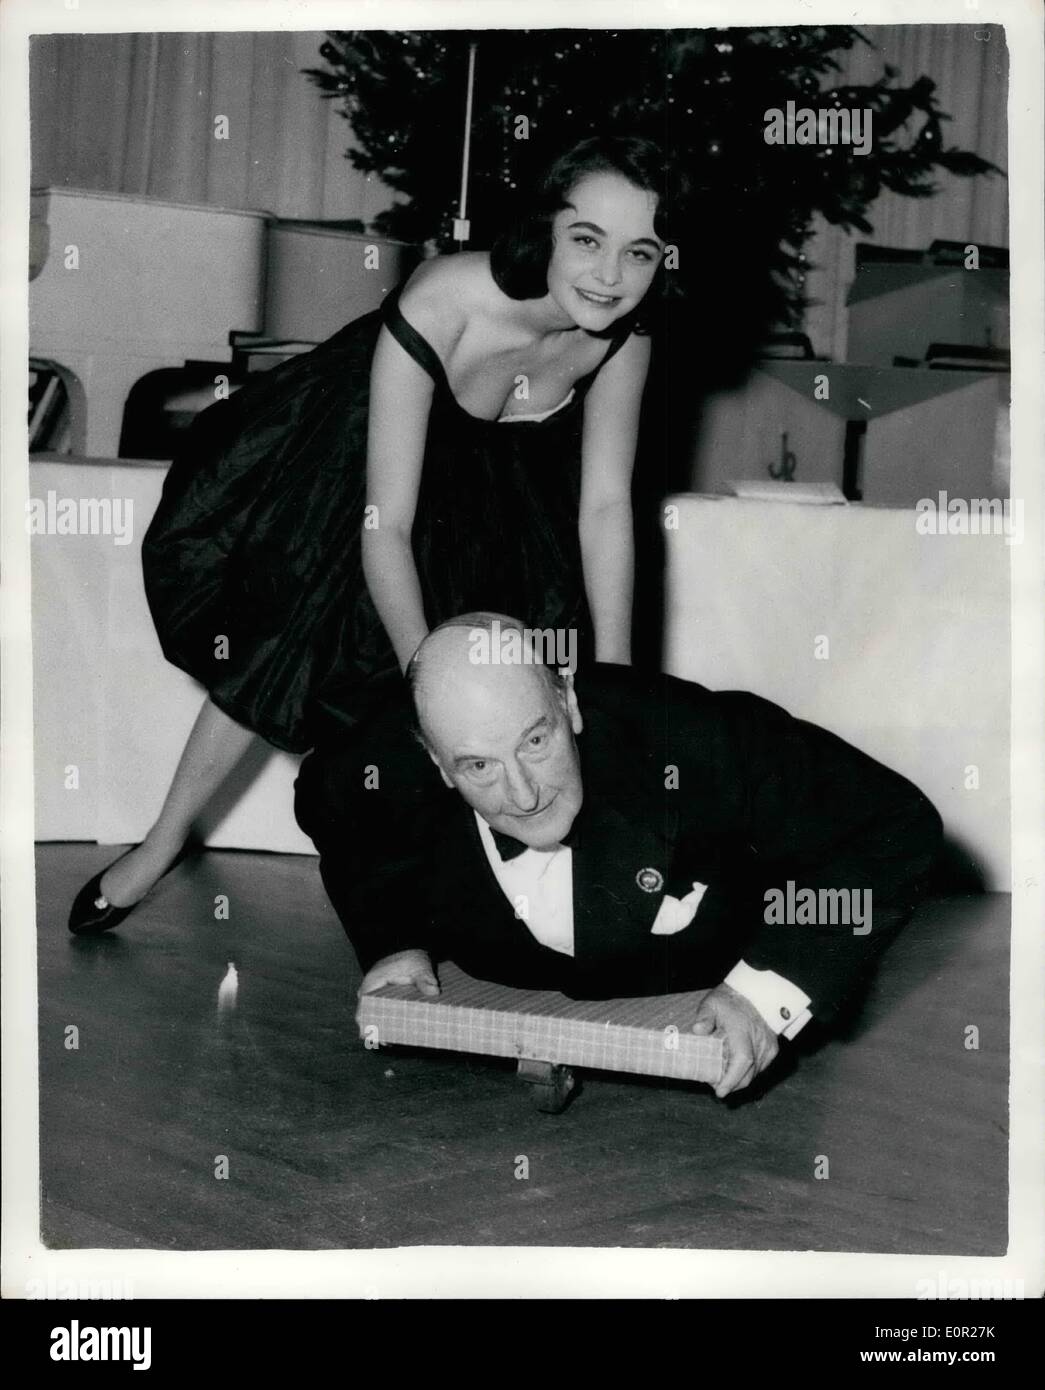 Dec. 12, 1957 - HOW TO BE GAY...AT SEVENTY TWO...LORD BRABAZON GOES TO A PARTY... A big push-and off goes seventy two year old LORD BRABAZON of Tara-on a dummy toboggan-helped by twenty one year old model TANIA EDYE-at the Cresta Ball held at the Savoy Hotel, London...Lord Brabazon is famous for his sporting enthusiast-for his seventieth birthday he celebrated by taking a 90 m.p.h. bob-sleigh ride on the Swiss Cresta Run. Stock Photo